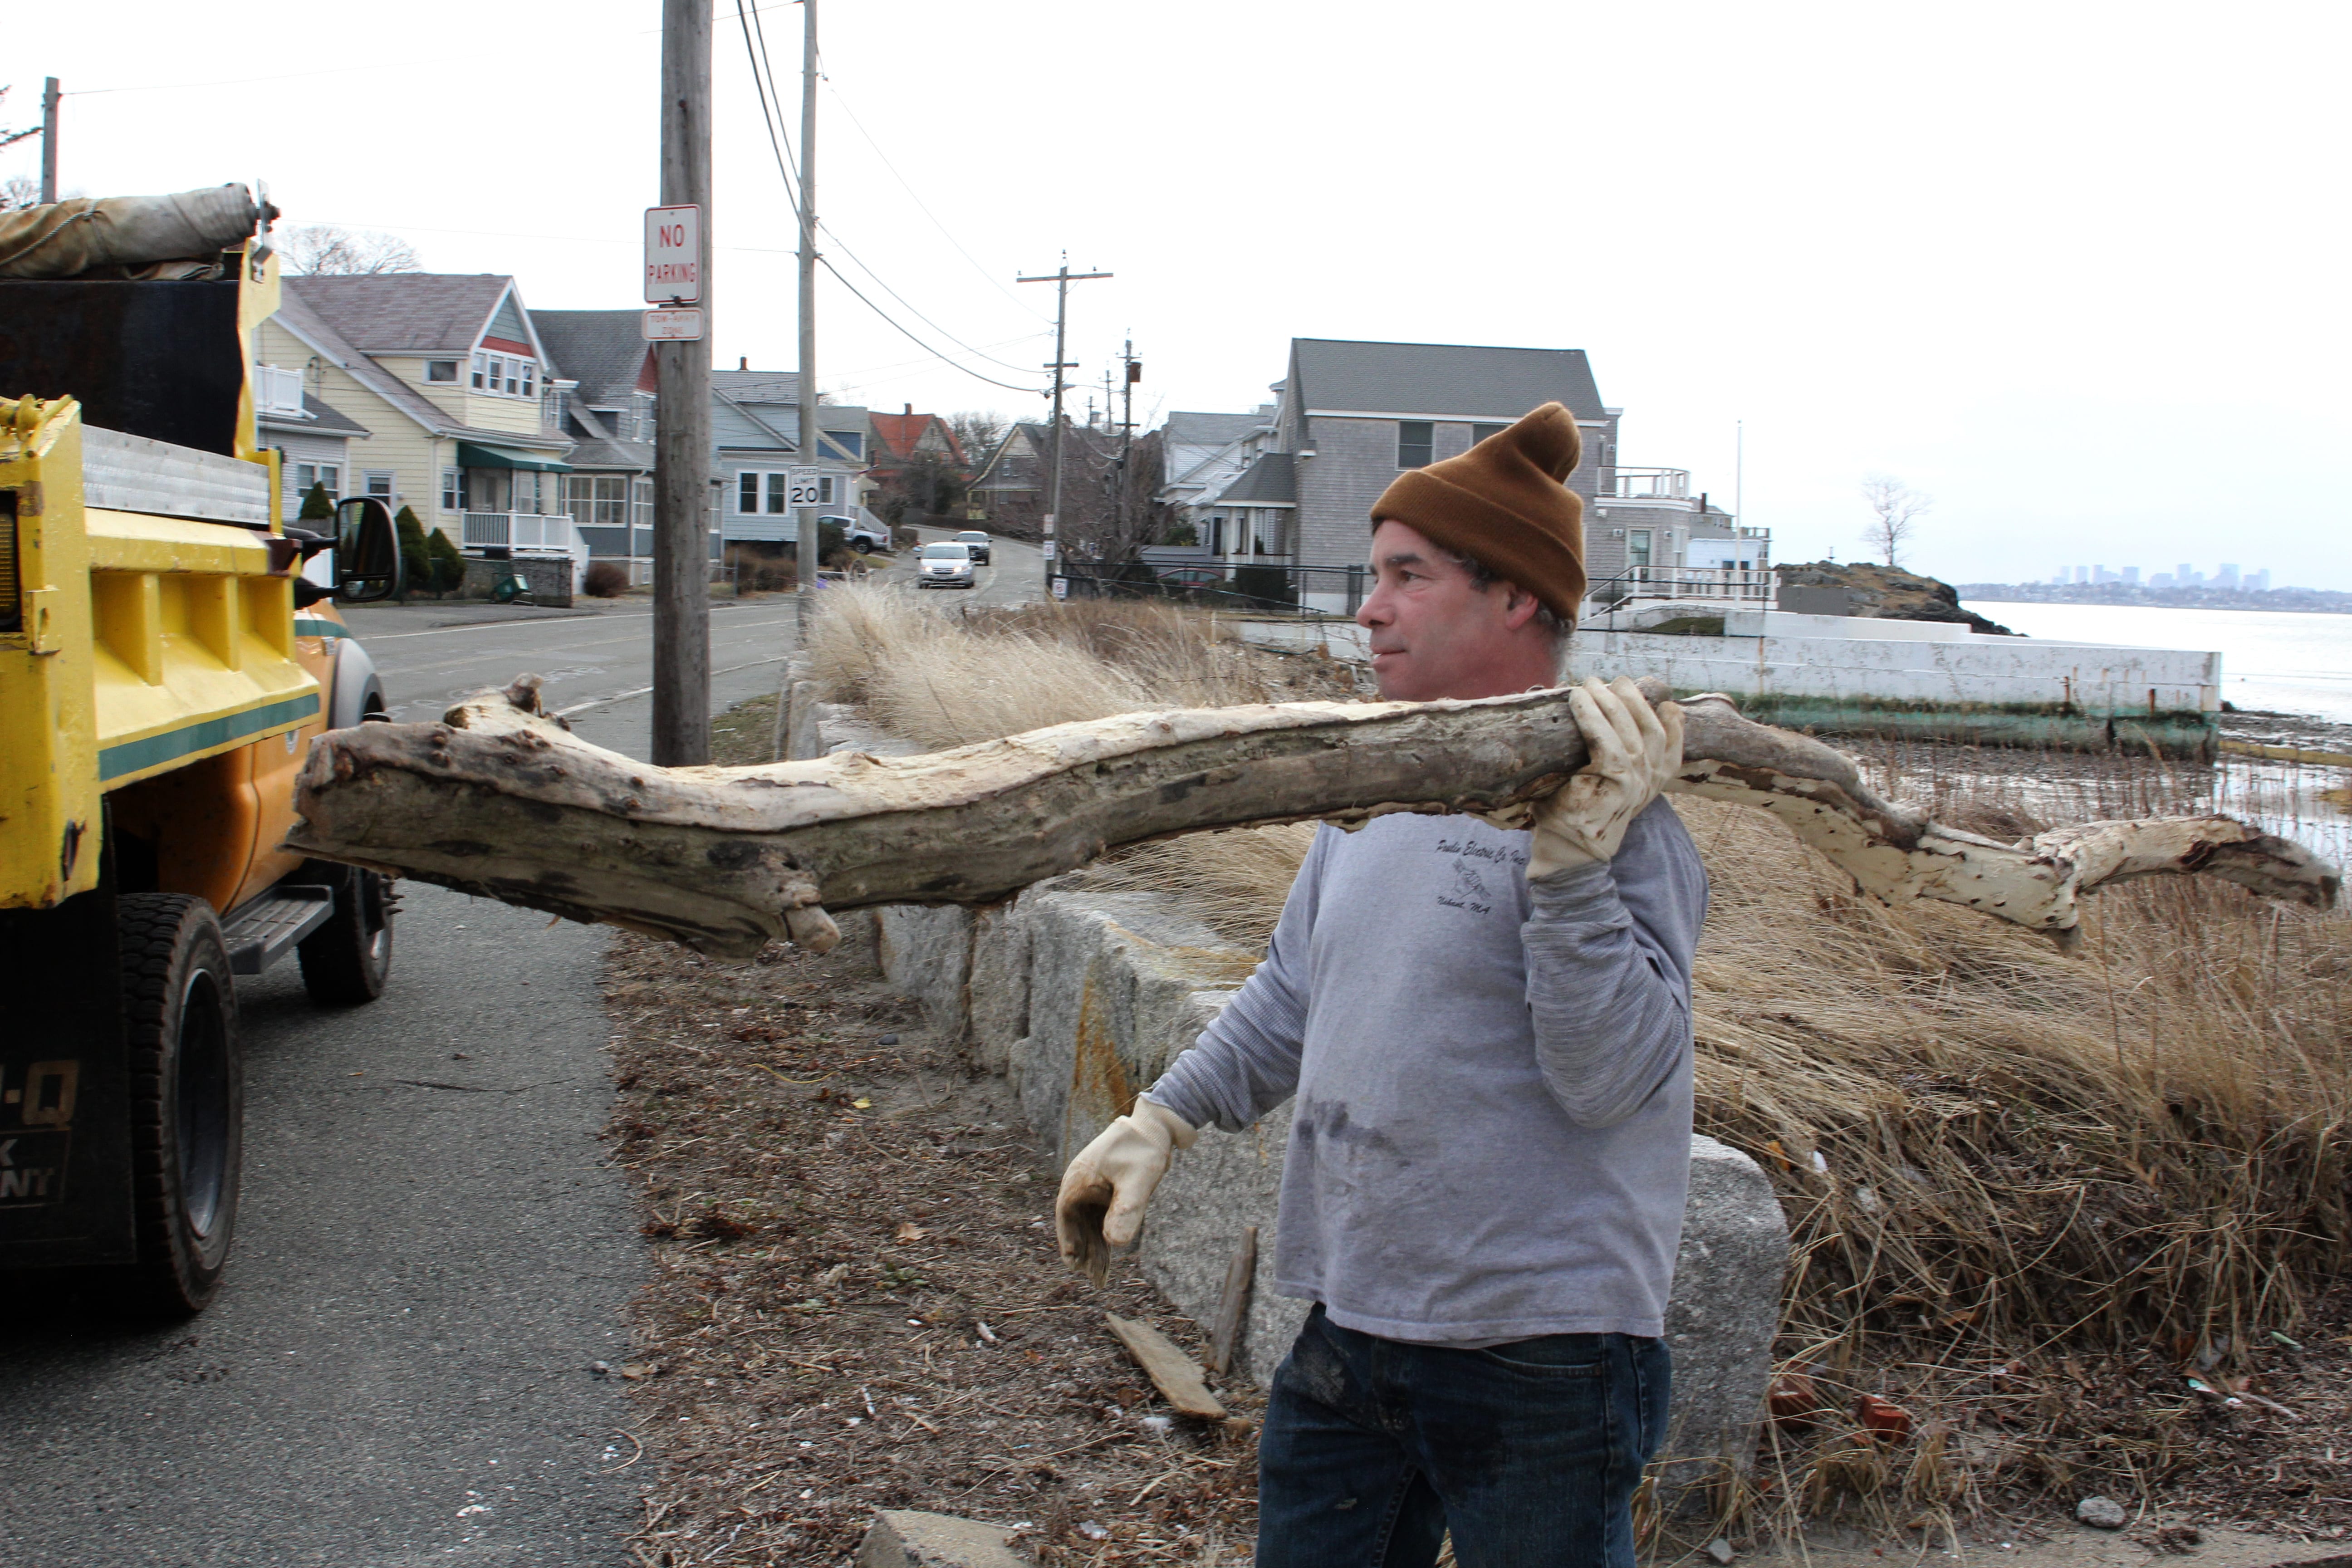 Nahant, Ma 3-1-18 Dan Gauvain, Nahant DPW, removes driftwood from a beach in Nahant before the storm throws it through the window of a house.